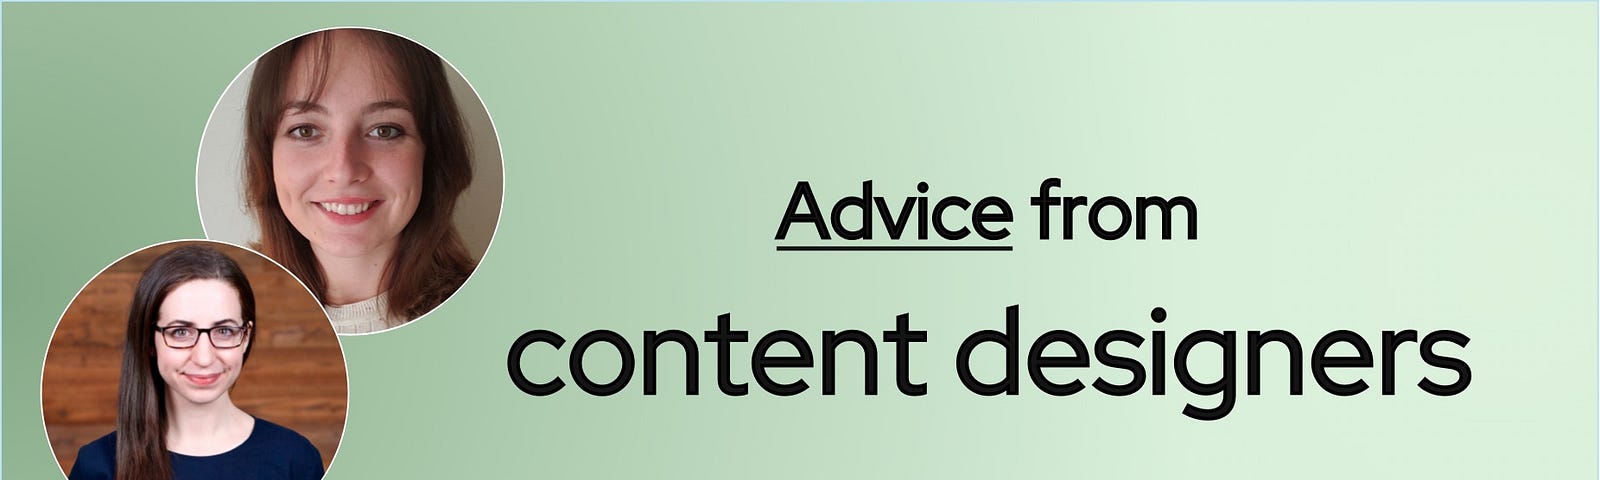 A banner that says “Advice from content designers” with headshots of 2 designers